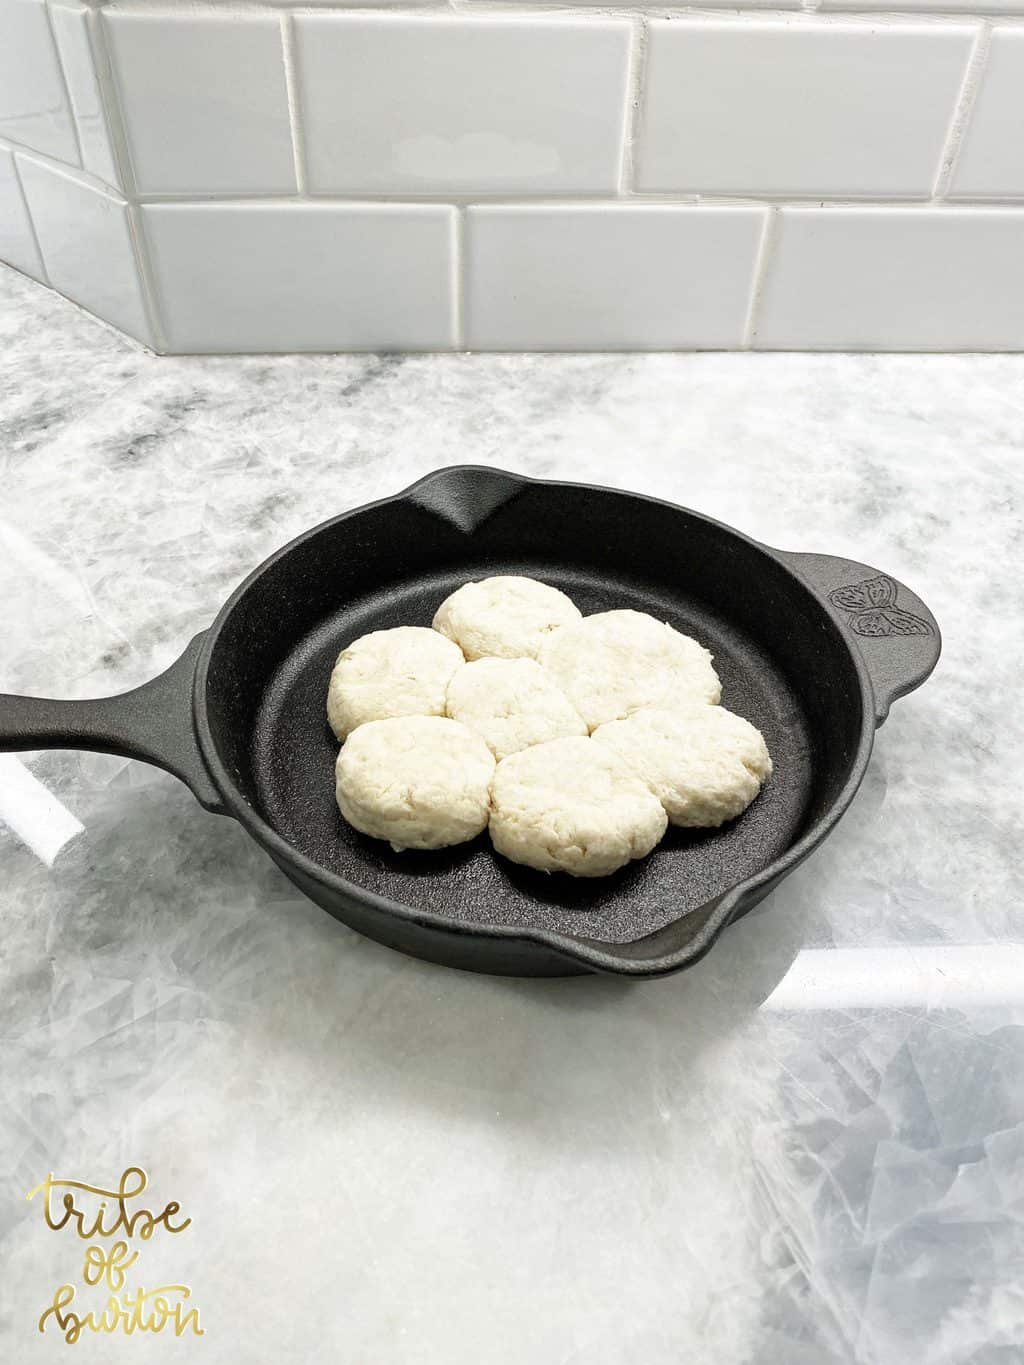 Skillet with homemade buttermilk biscuits ready to go in the oven.